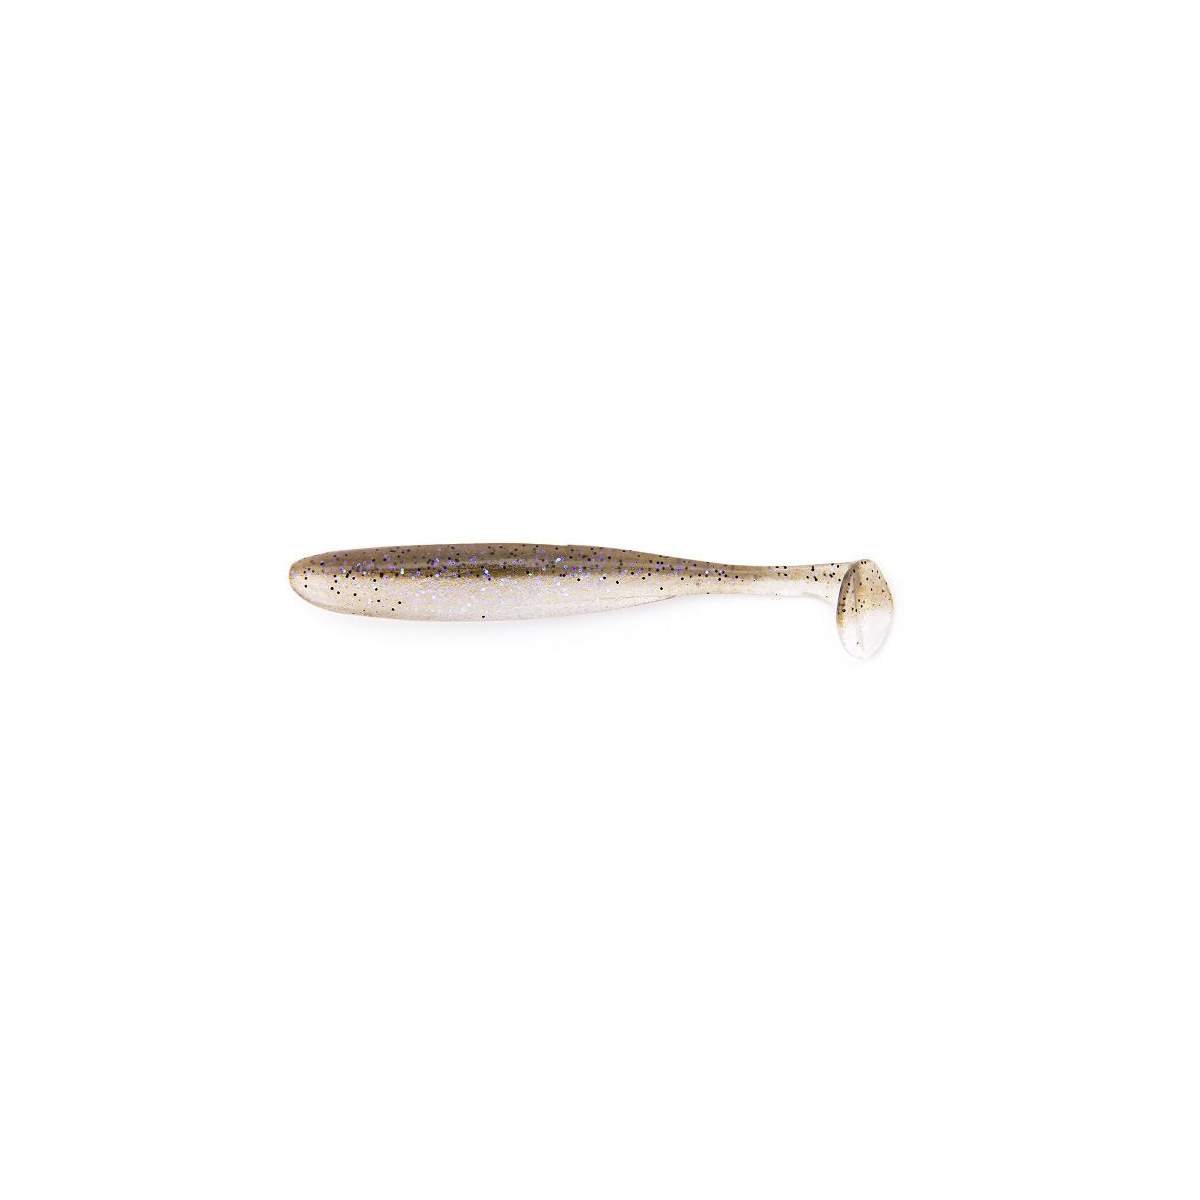 Keitech Easy Shiner 5 Electric Shad, 7,95 €